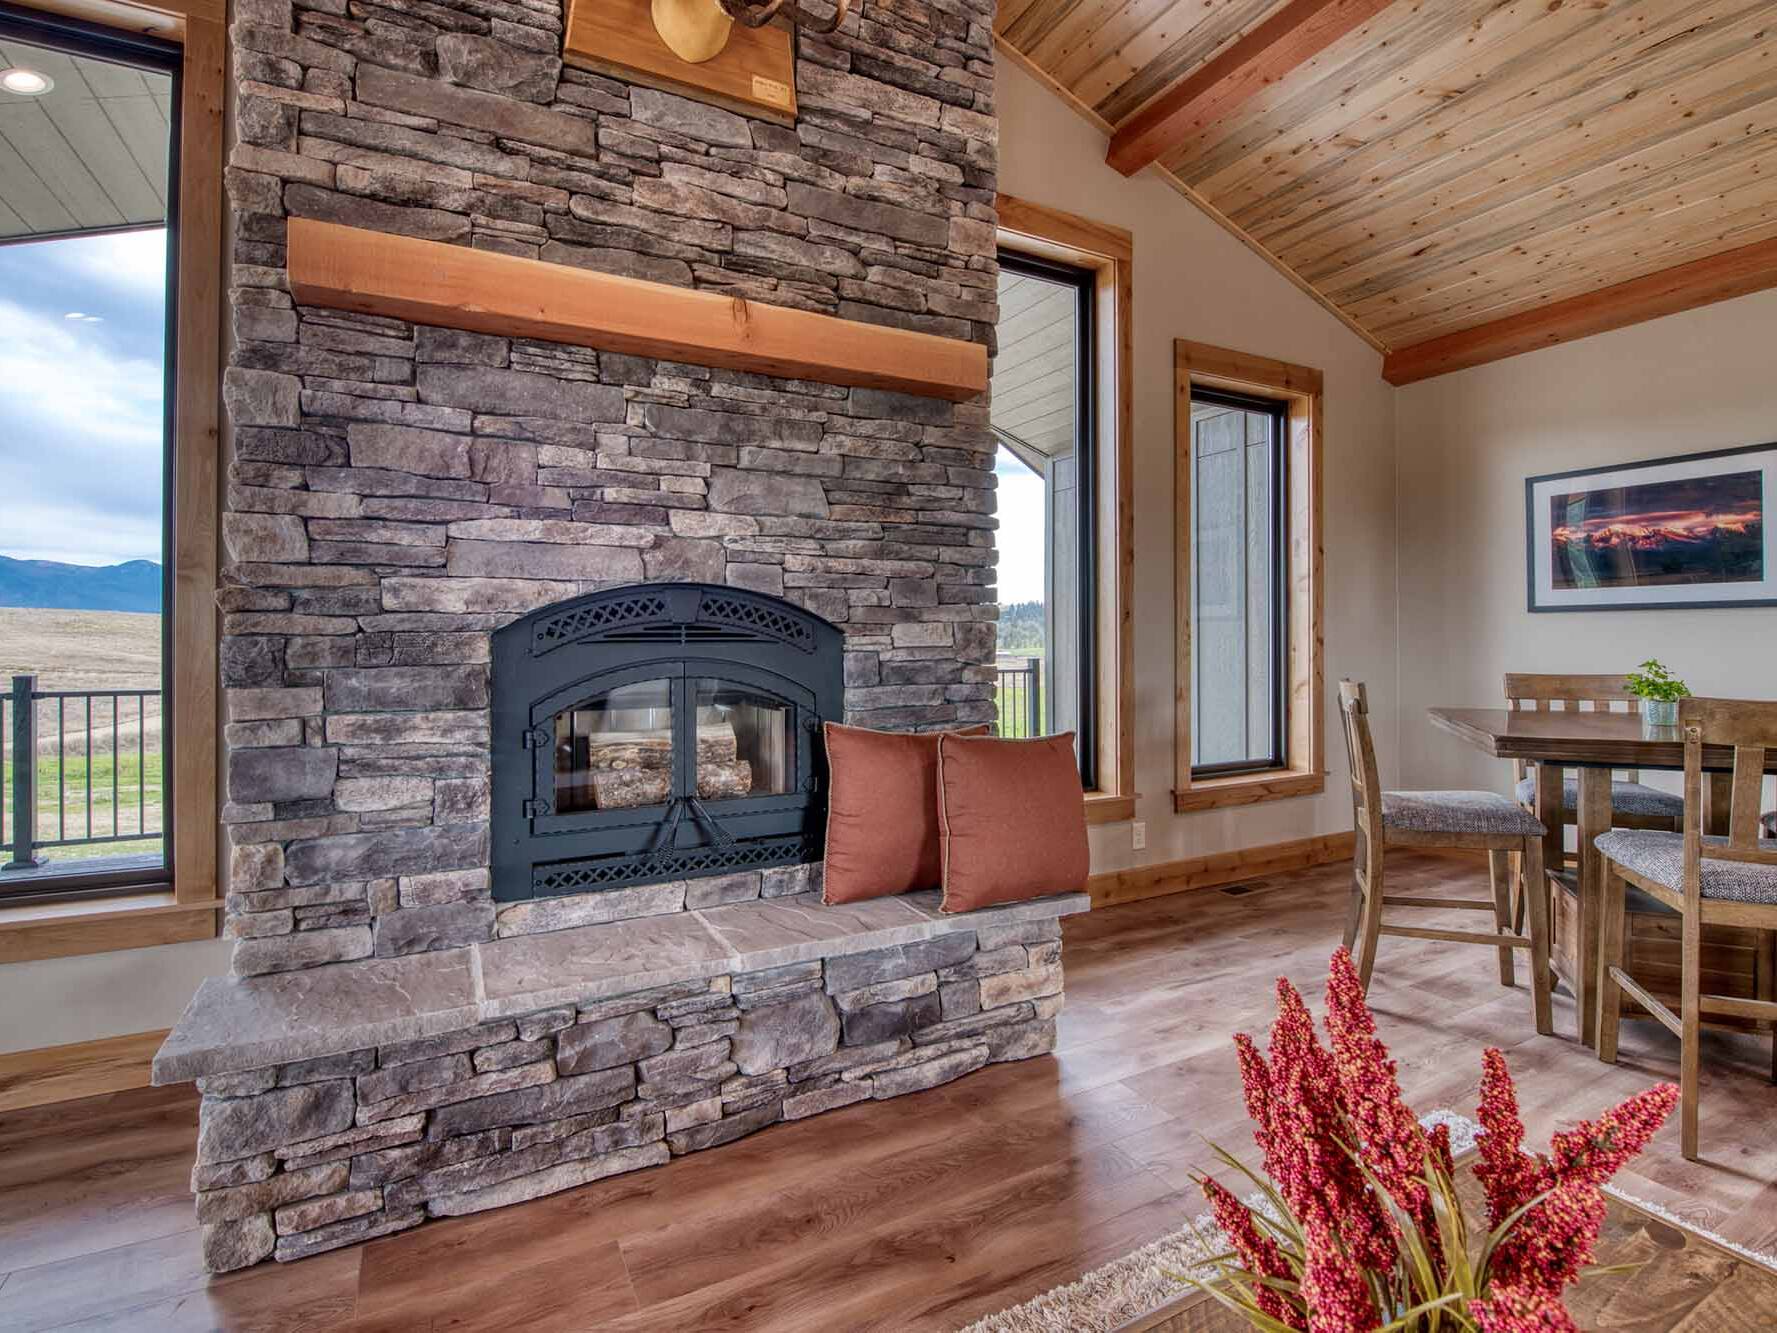 Living Room with a wood burning fireplace, vaulted ceiling, blue pine t&g ceiling, and timber accents in a custom home built by Big Sky Builders in Stevensville, MT